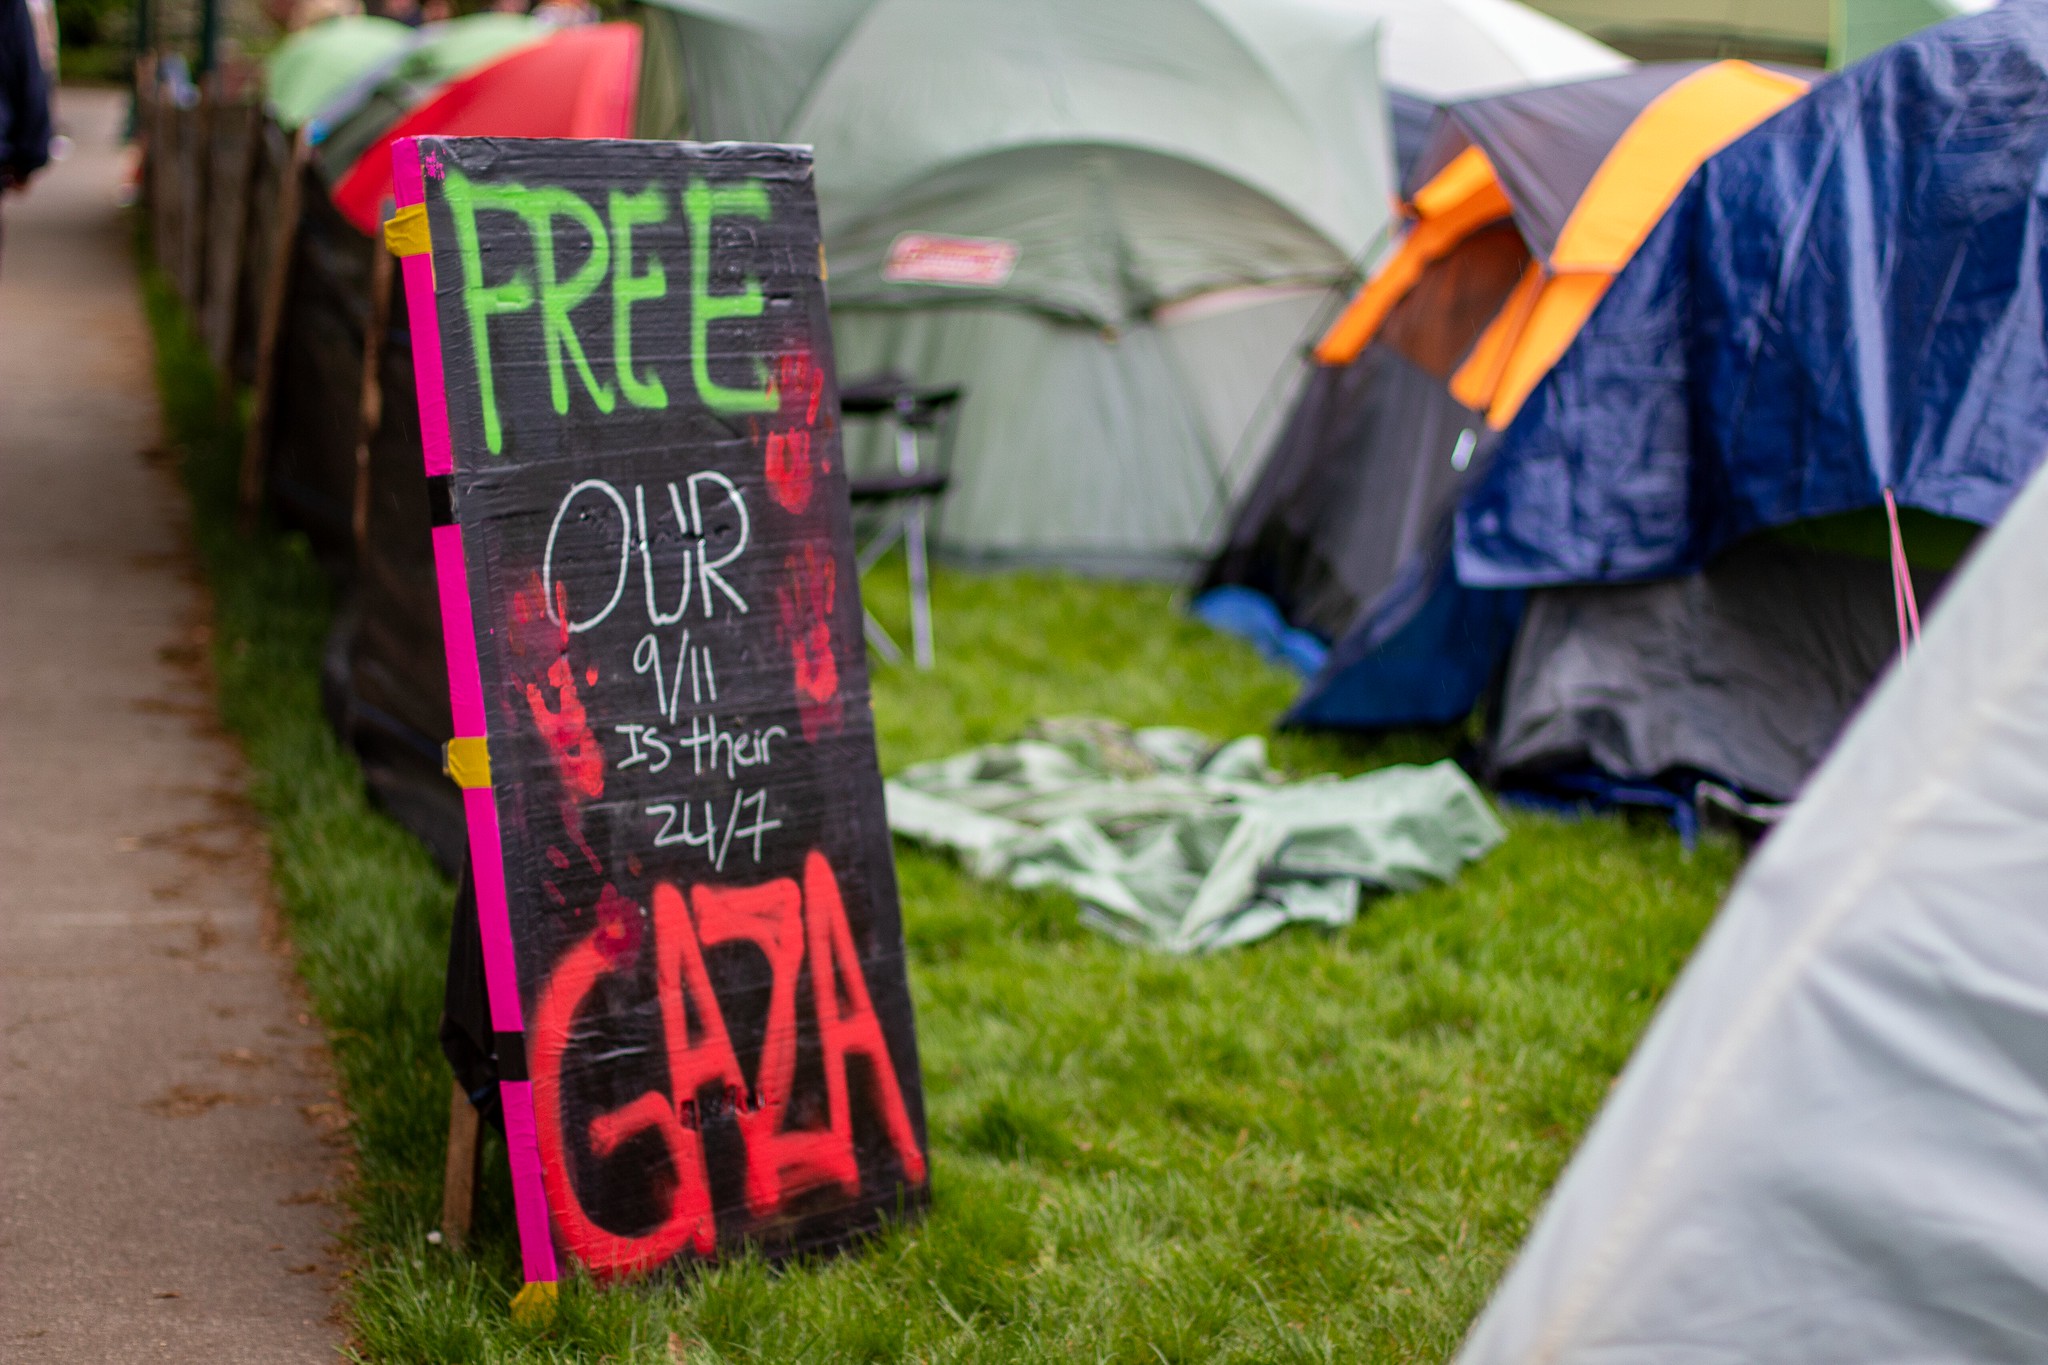 Palestine solidarity protest camps, like this University of Oregon encampment pictured, have been making news in Australia, and raising questions of how far the rights to protest and peaceful assembly extends in practice. : Flickr: David Geitgey Sierralupe Free to use